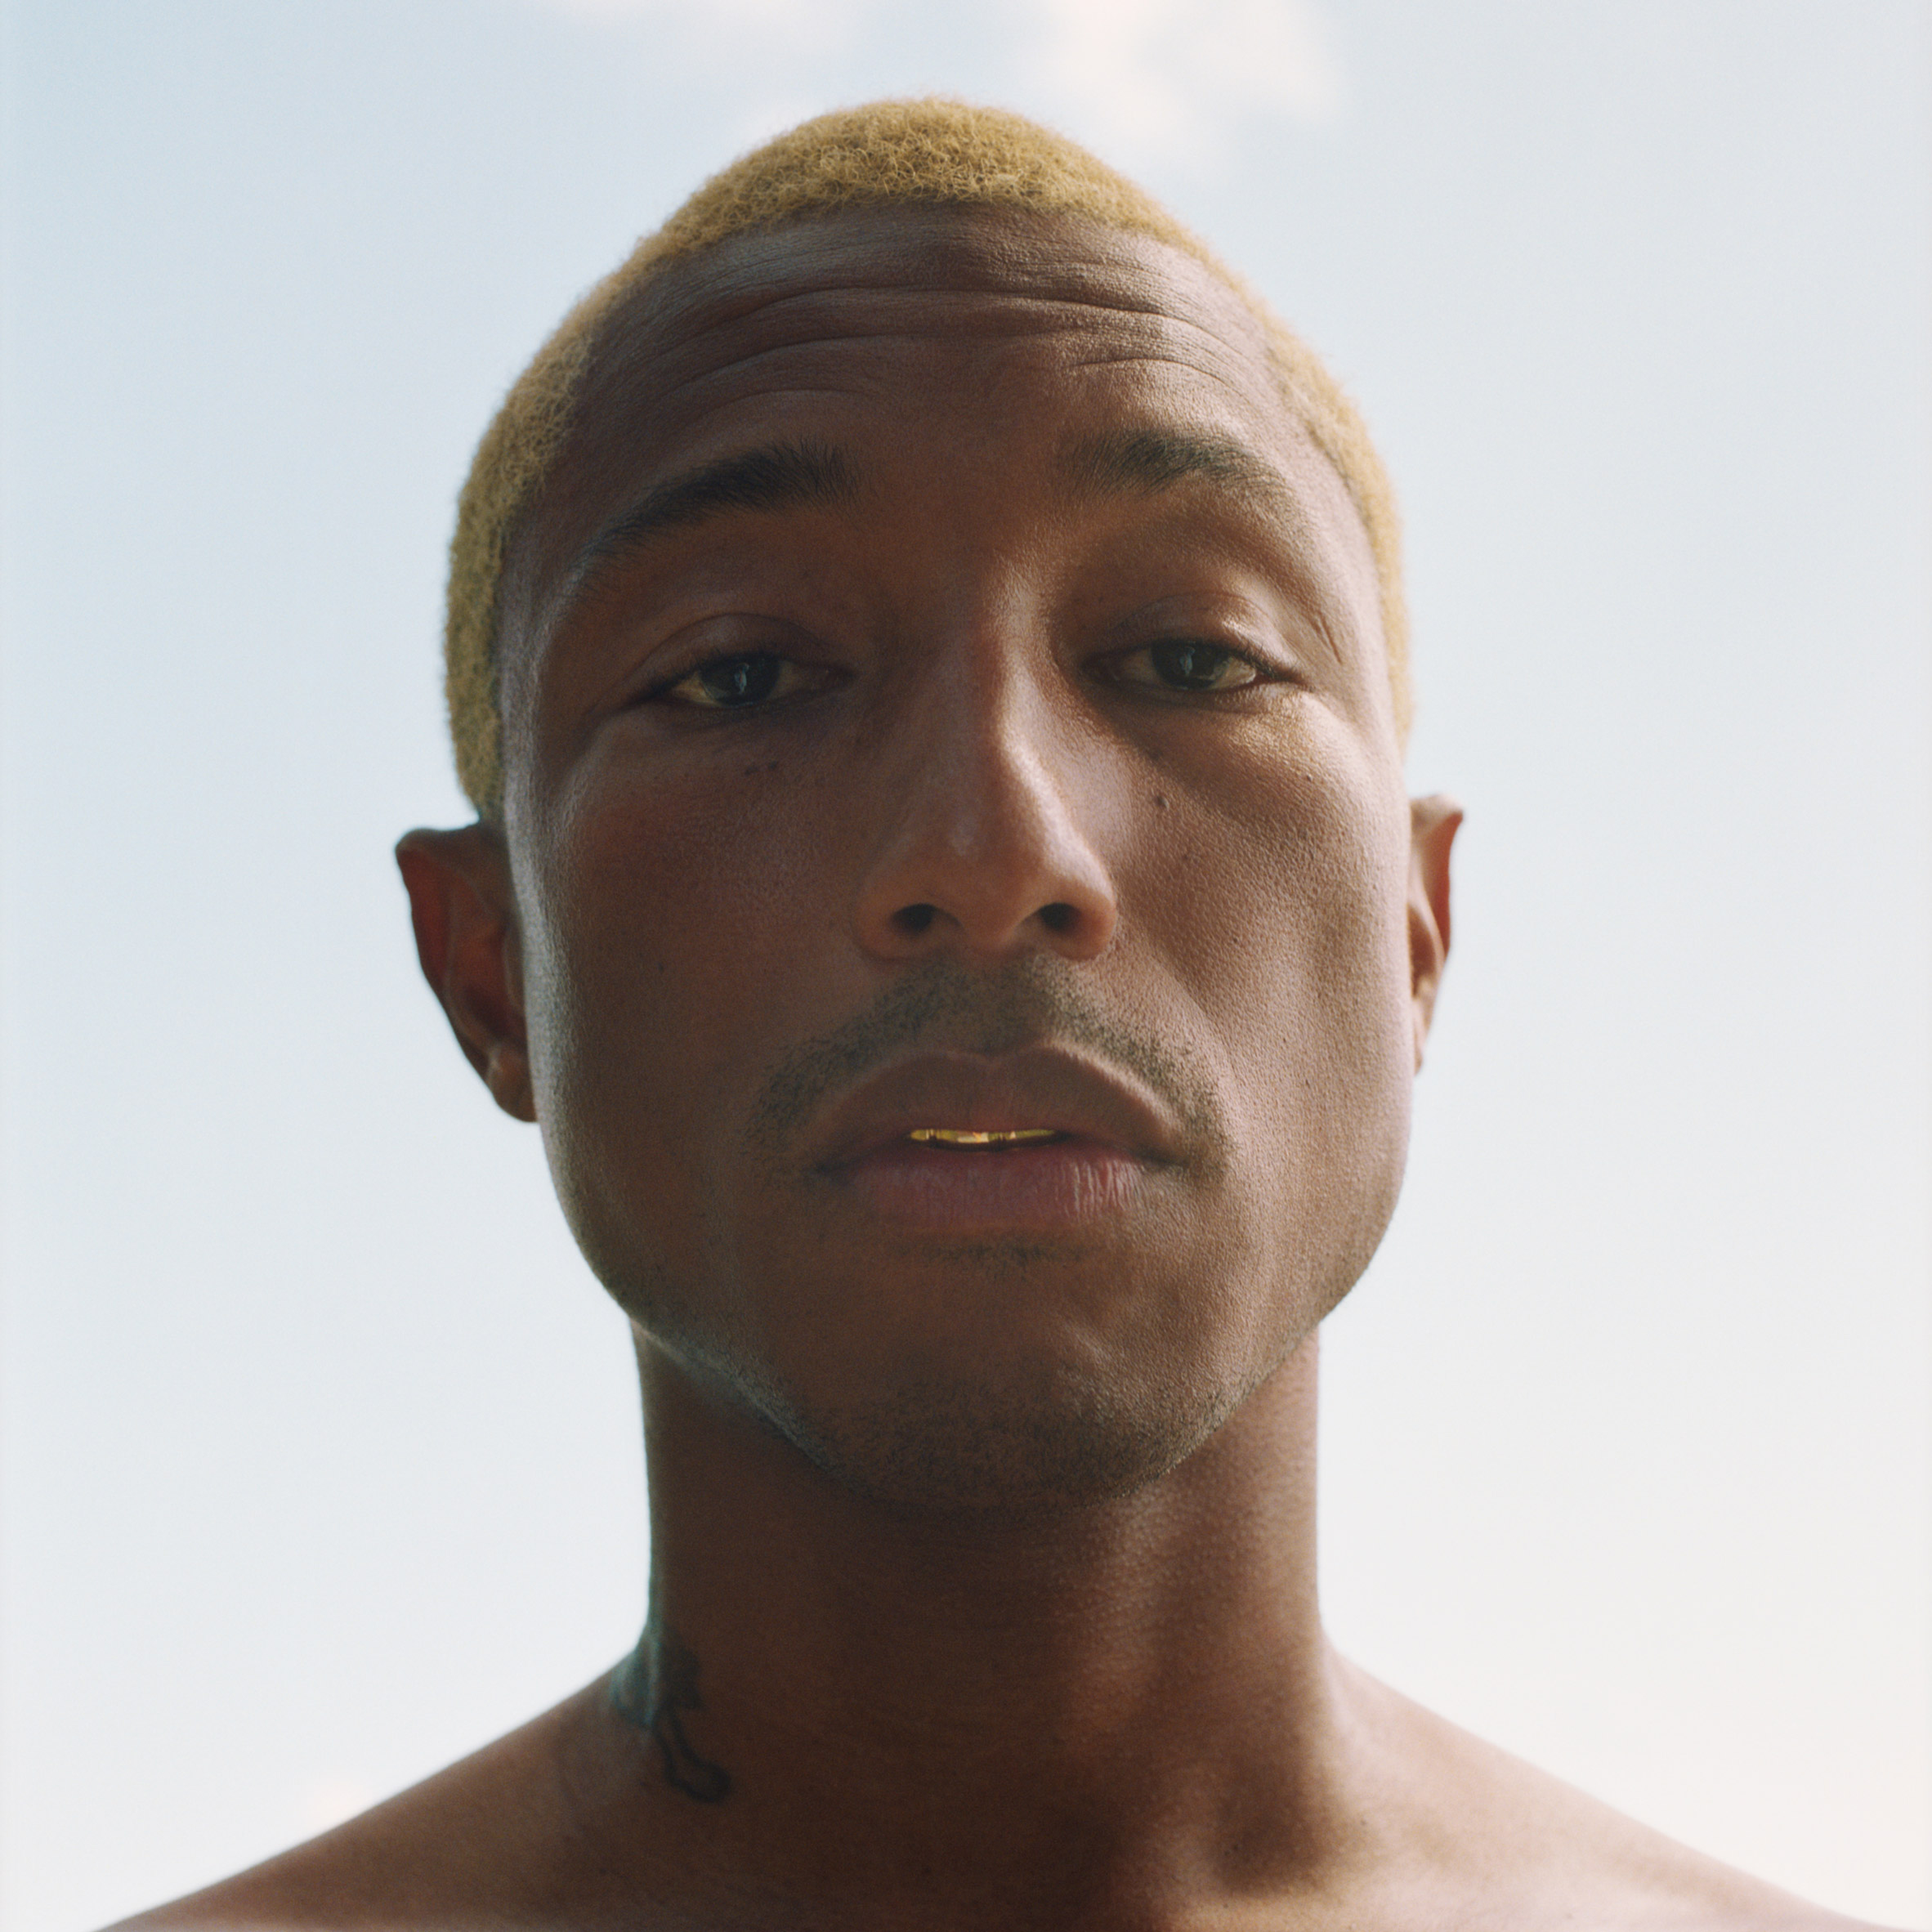 Humanrace by Pharrell Williams